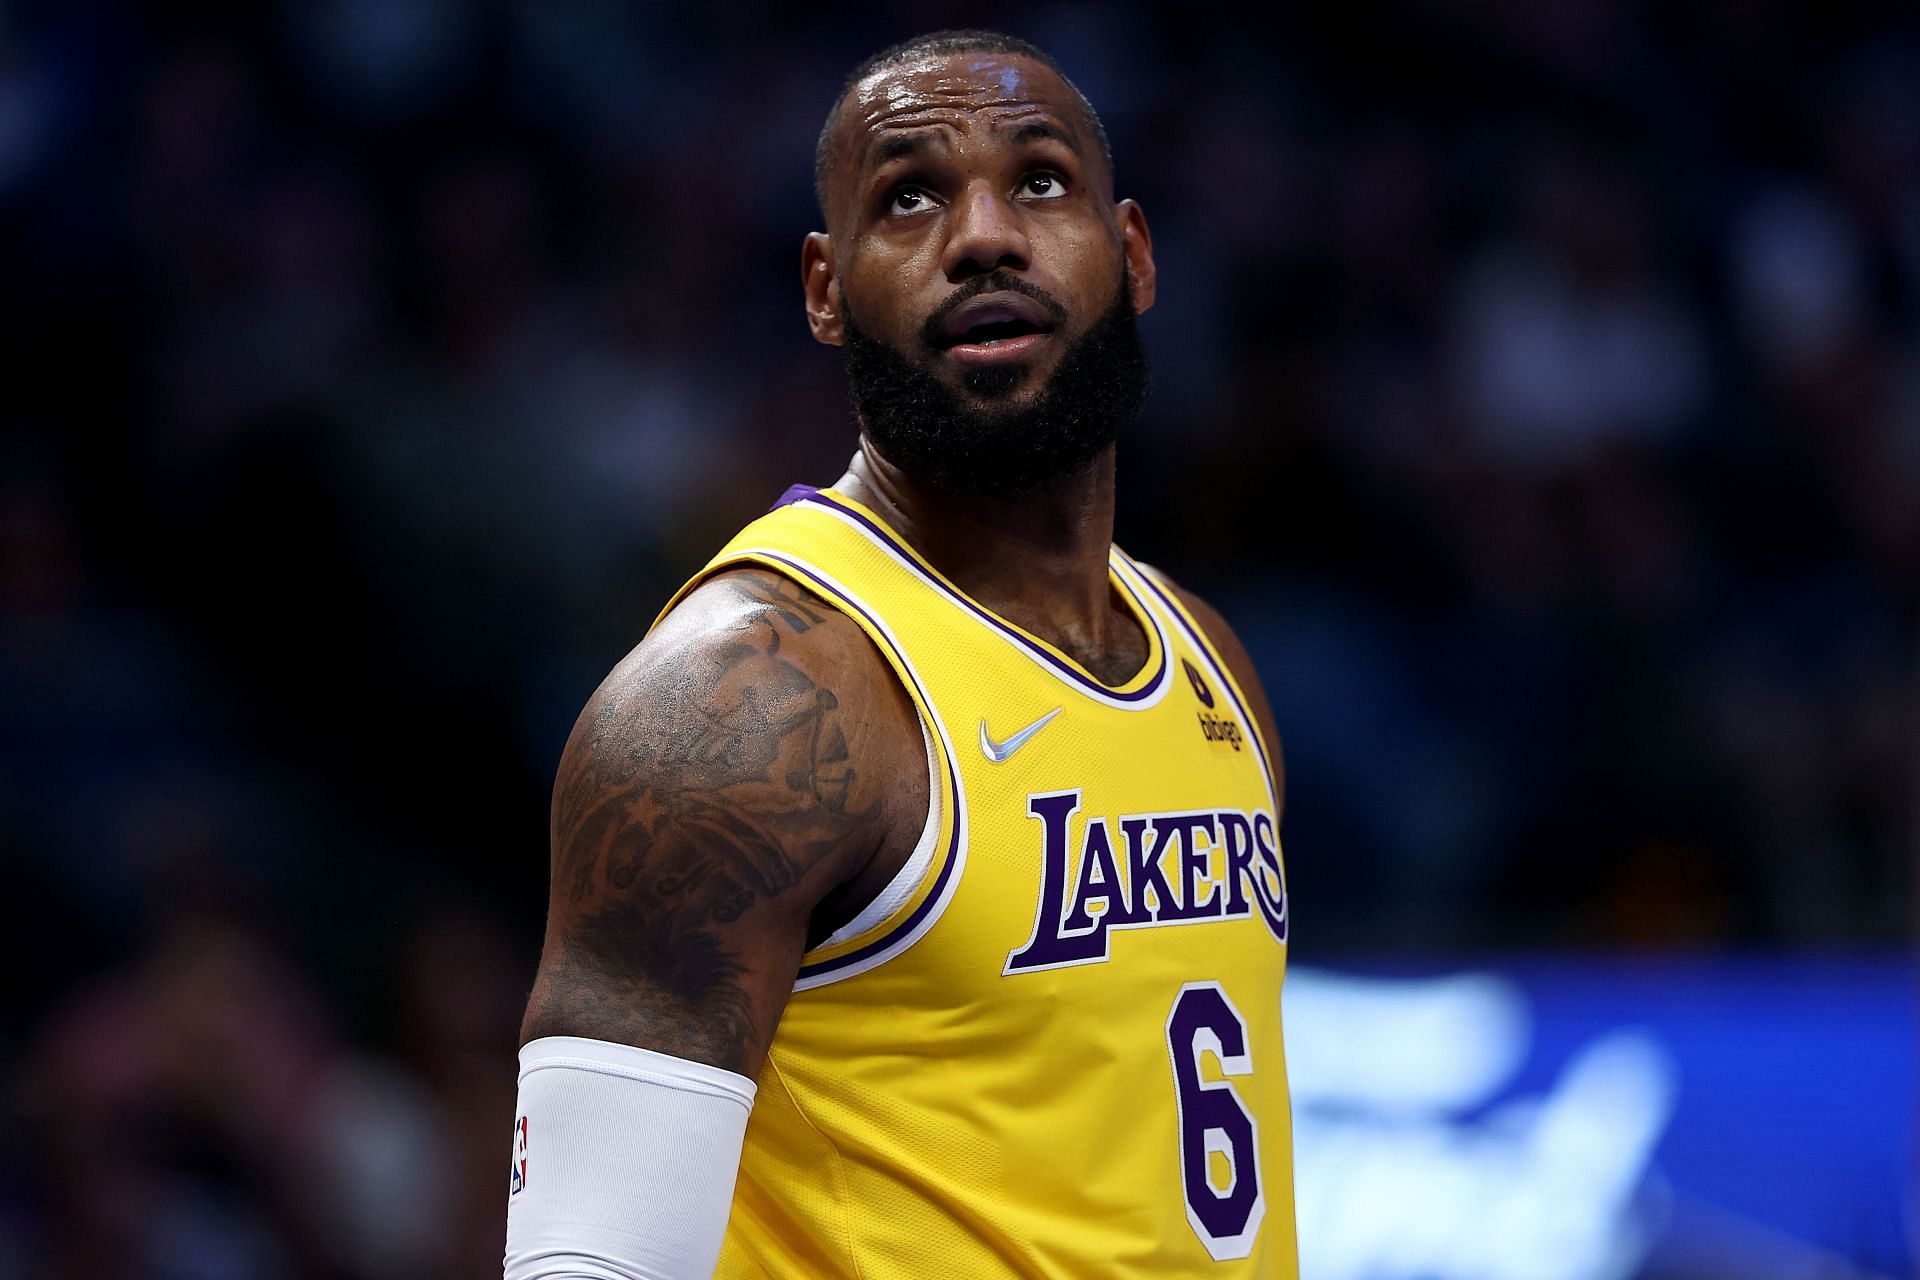 Superstar LeBron James of the Los Angeles Lakers.